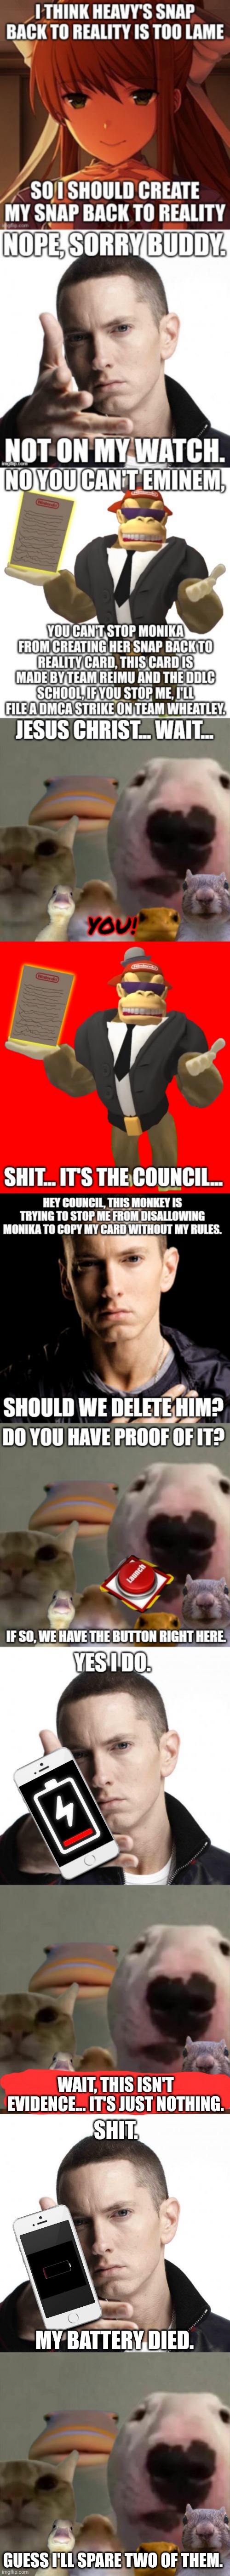 Eminem's phone battery died, and the council gives up. | WAIT, THIS ISN'T EVIDENCE... IT'S JUST NOTHING. SHIT. MY BATTERY DIED. GUESS I'LL SPARE TWO OF THEM. | image tagged in eminem video game logic,the council remastered | made w/ Imgflip meme maker